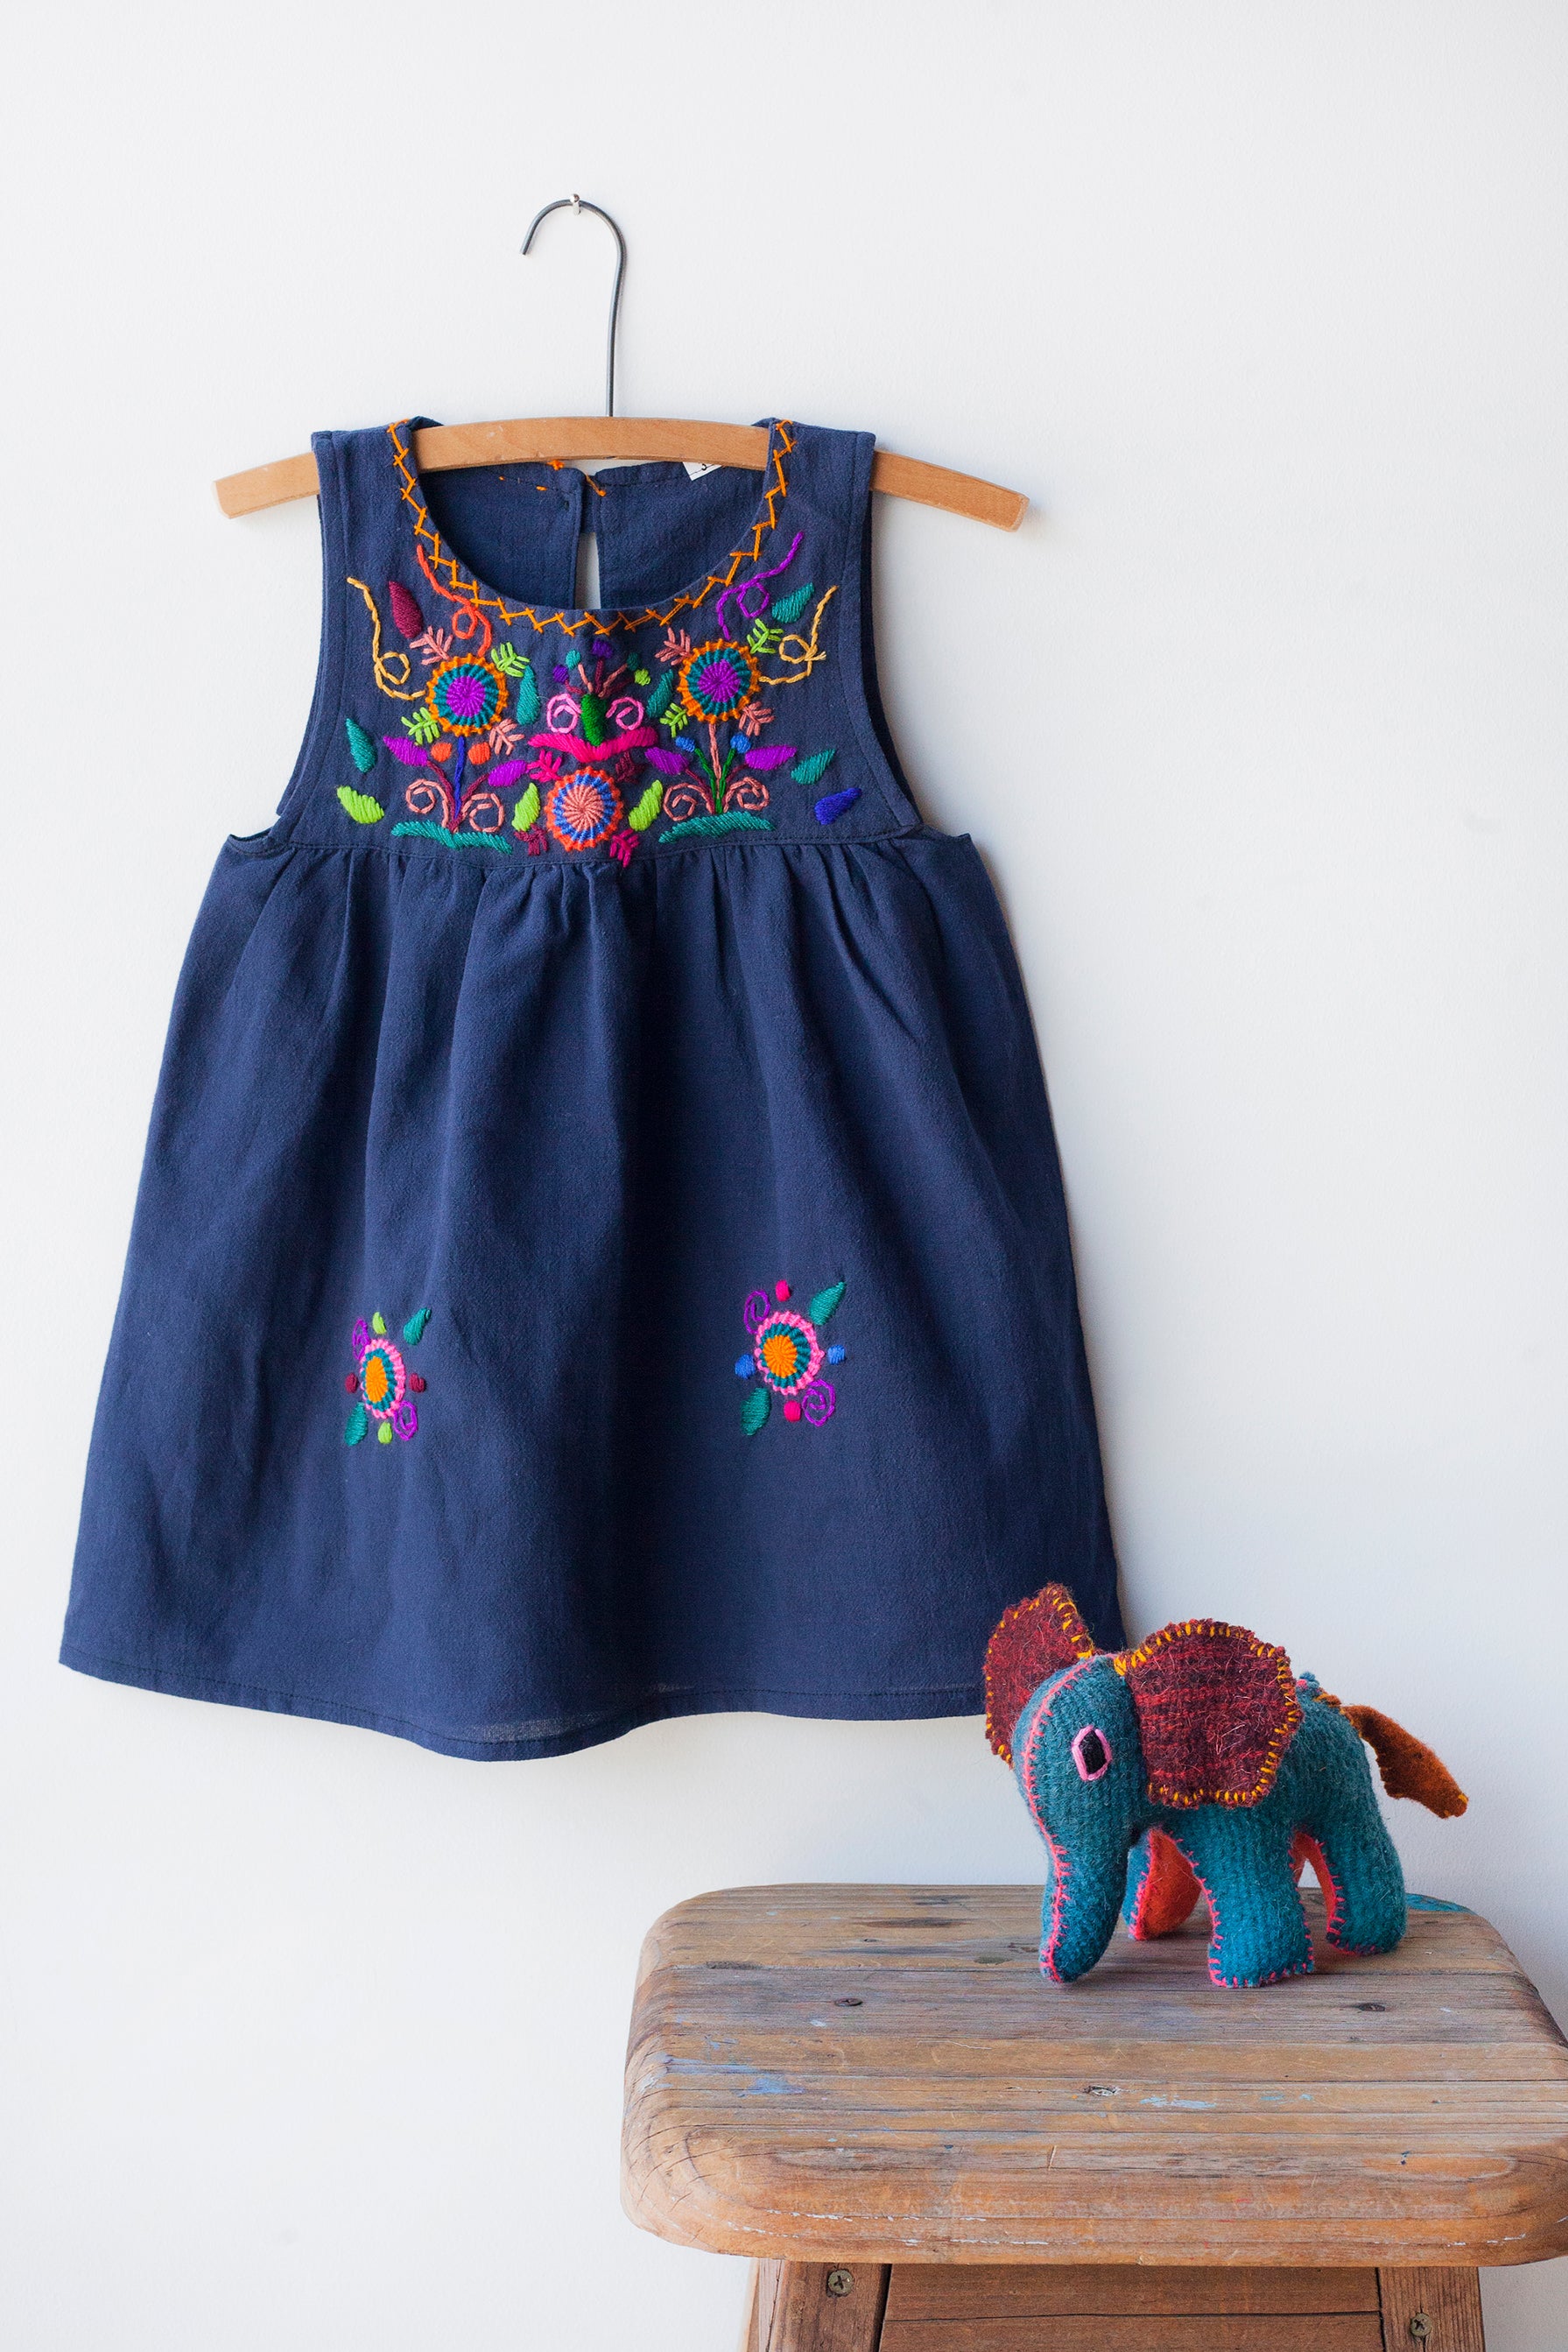 Kids sleeveless navy sun dress hanging with multicolor hand-embroidered floral pattern on chest and two hand-embroidered flowers near the bottom of the skirt on the front left and right.